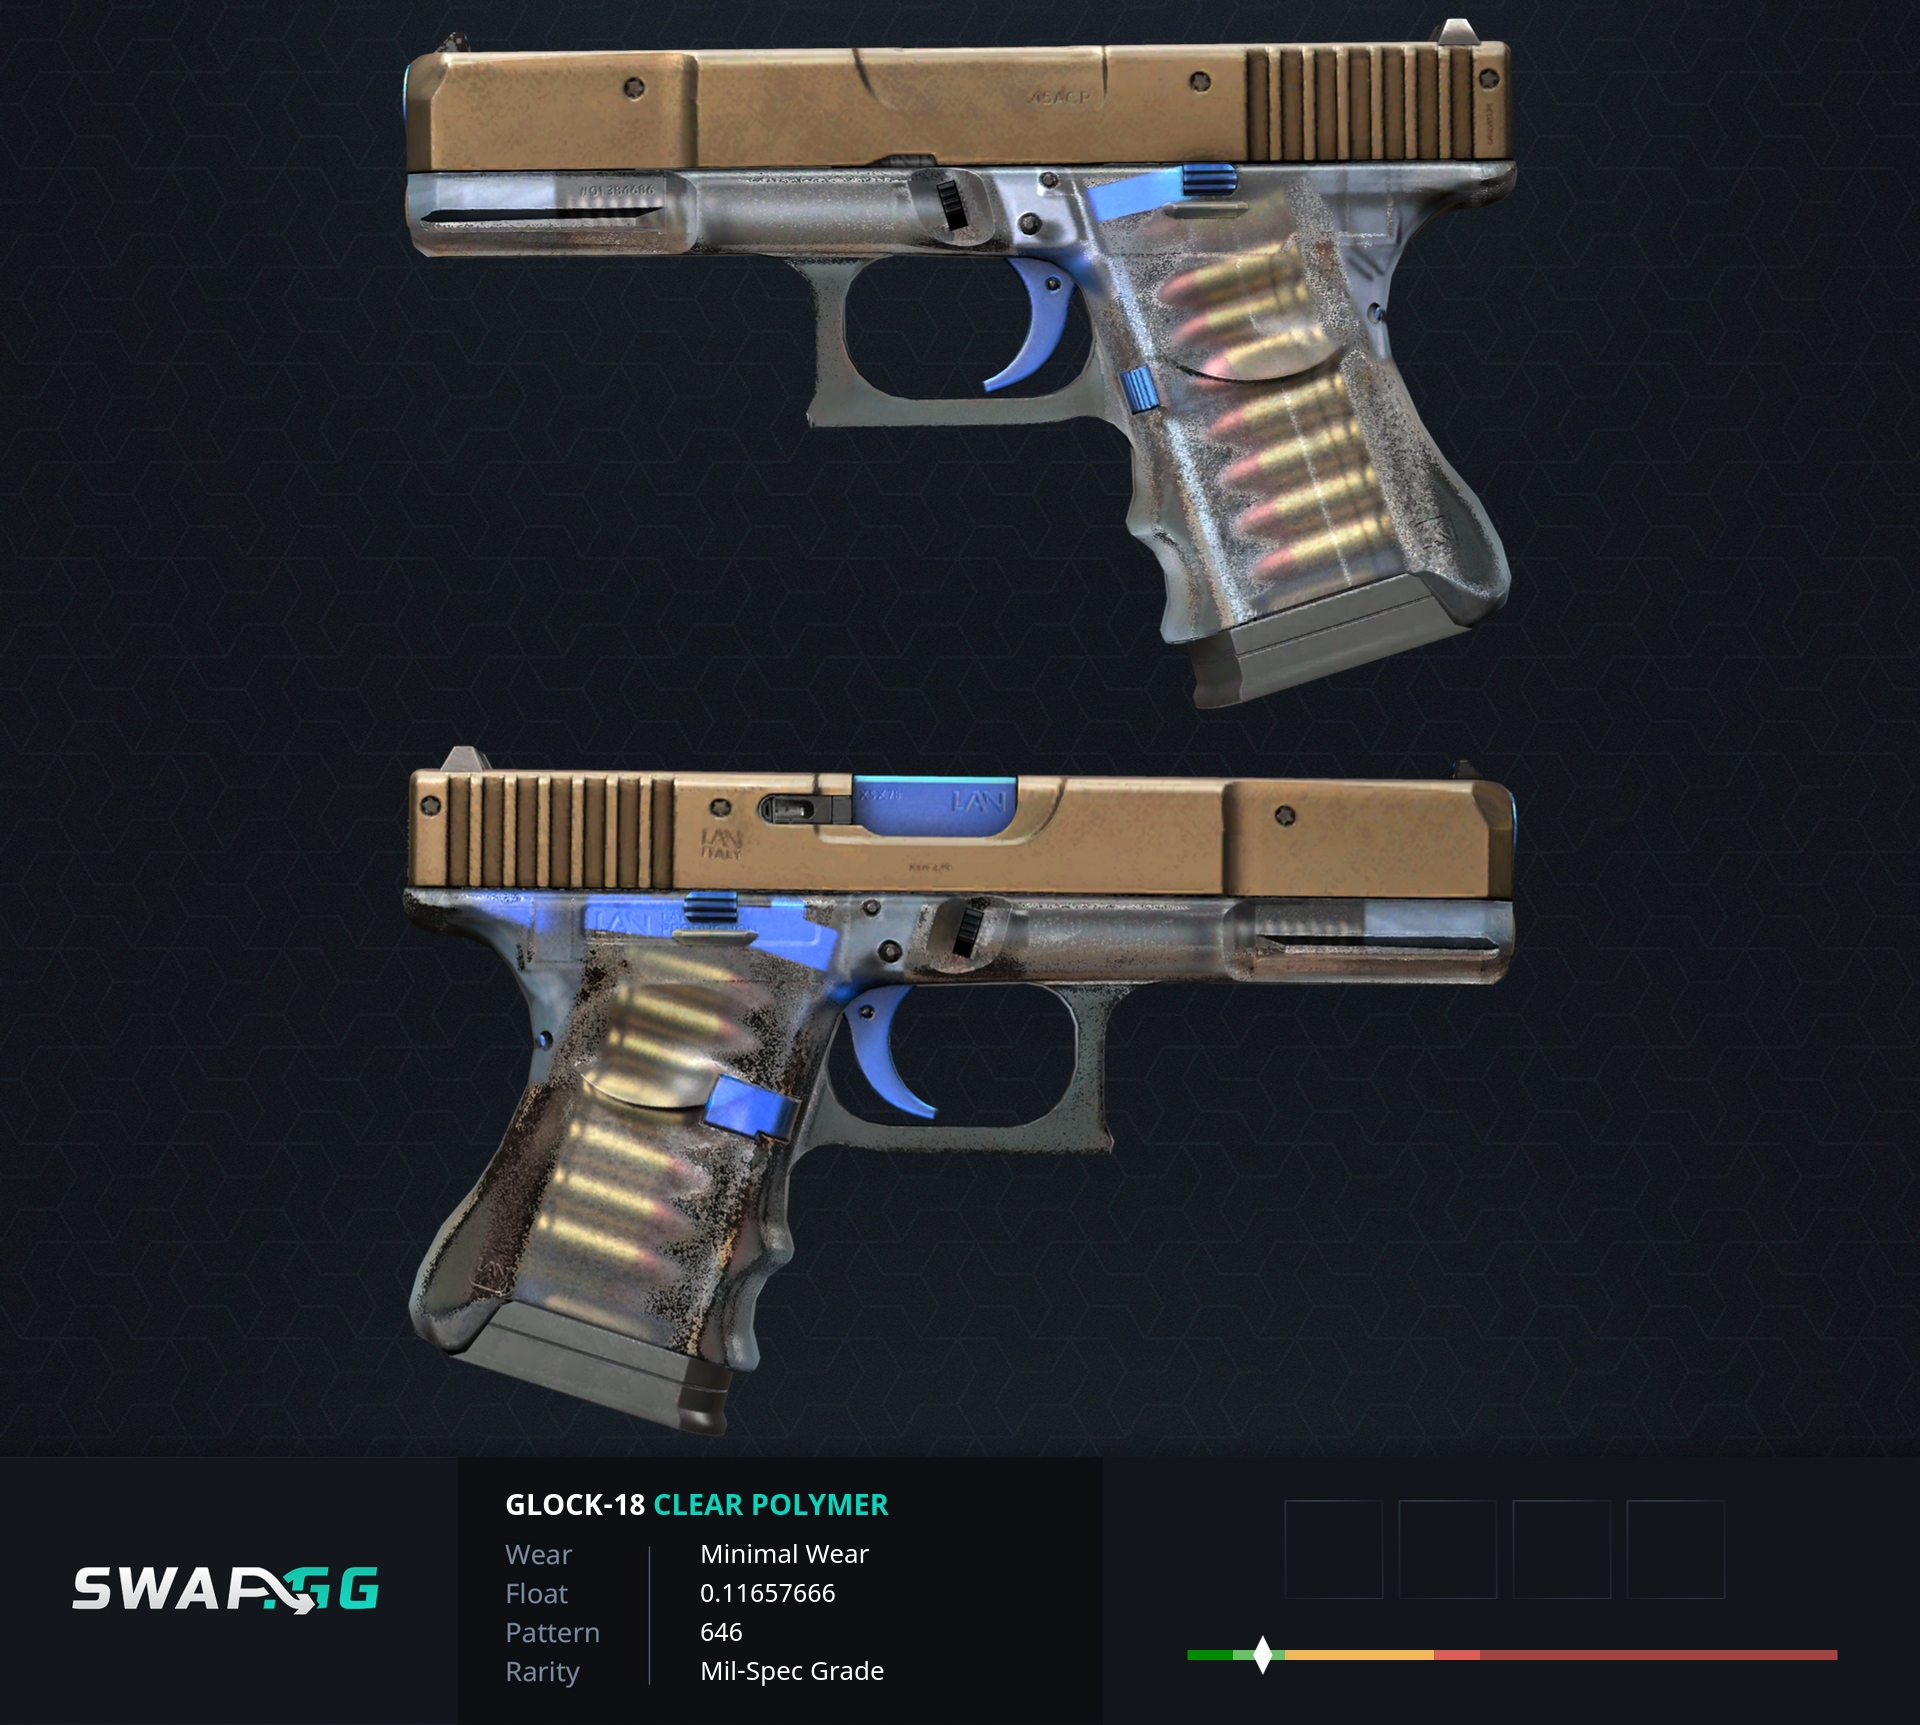 Glock-18 Candy Apple cs go skin download the new for mac